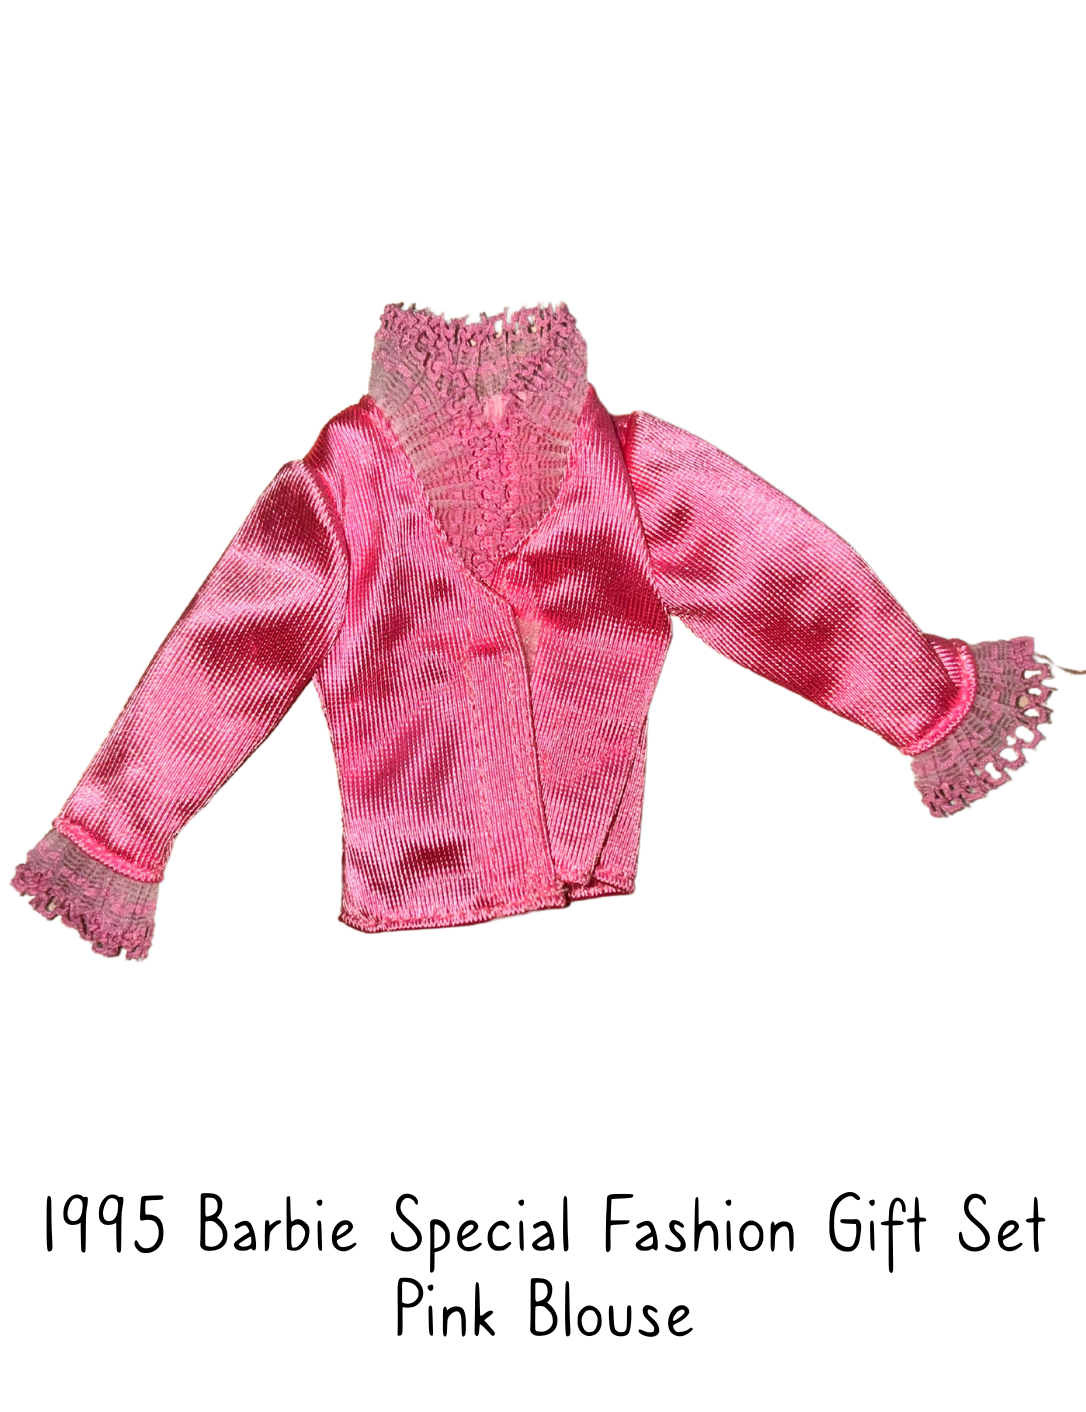 1995 Barbie Special Fashion Gift Set Pink Blouse